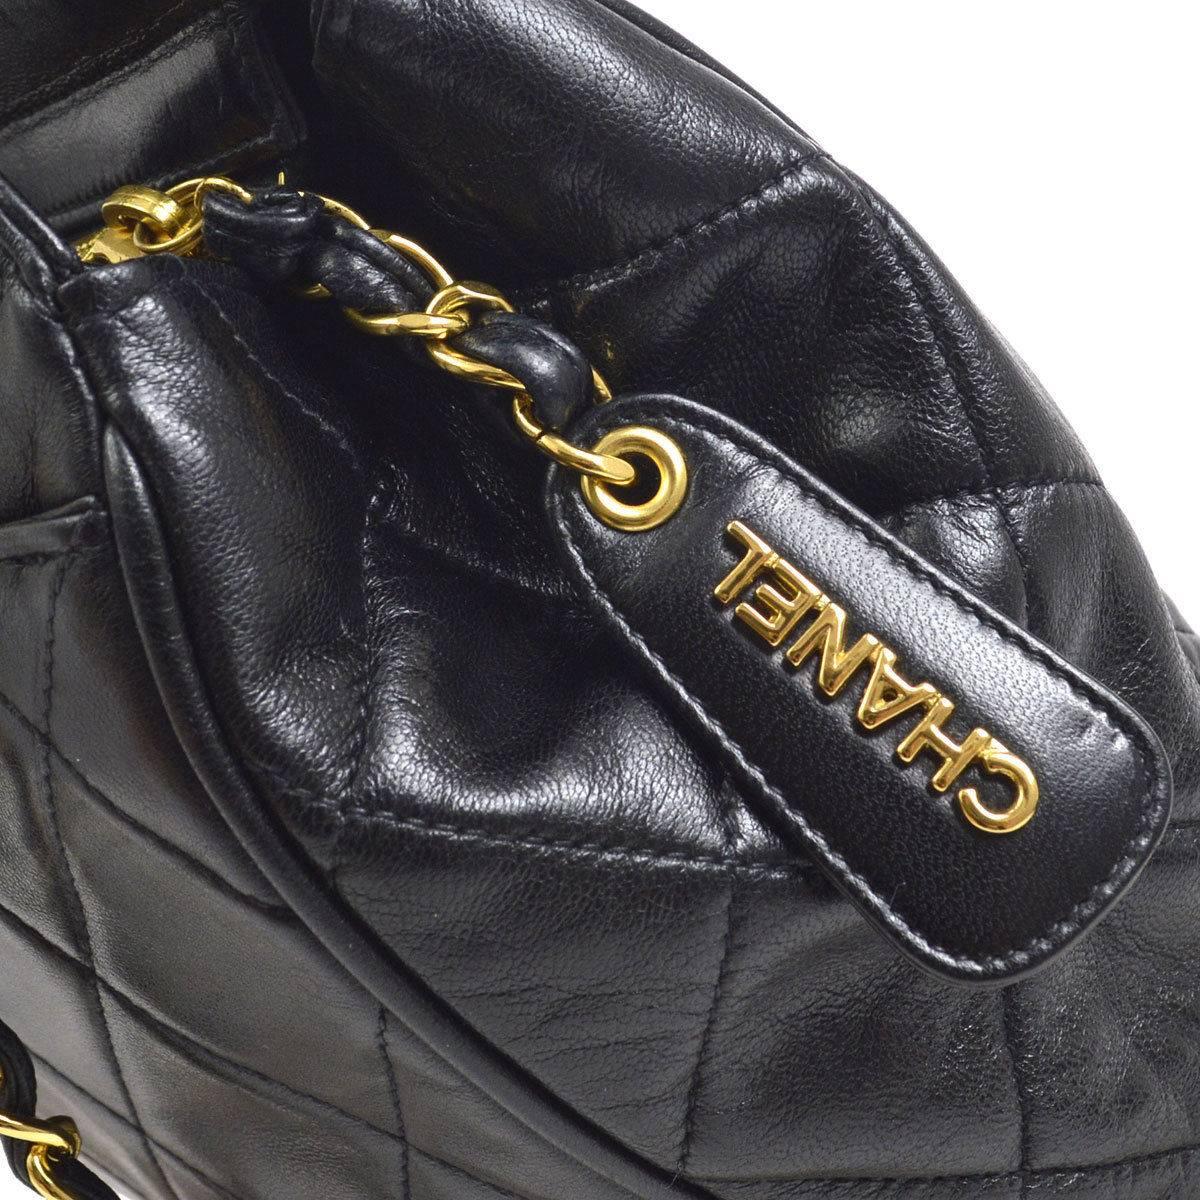 Chanel Black Lambskin Leather Quilted Carryall Evening Tote Shoulder Bag

Lambskin leather
Gold tone hardware
Leather lining
Zipper closure
Date code present
Made in Italy
Shoulder strap drop 19